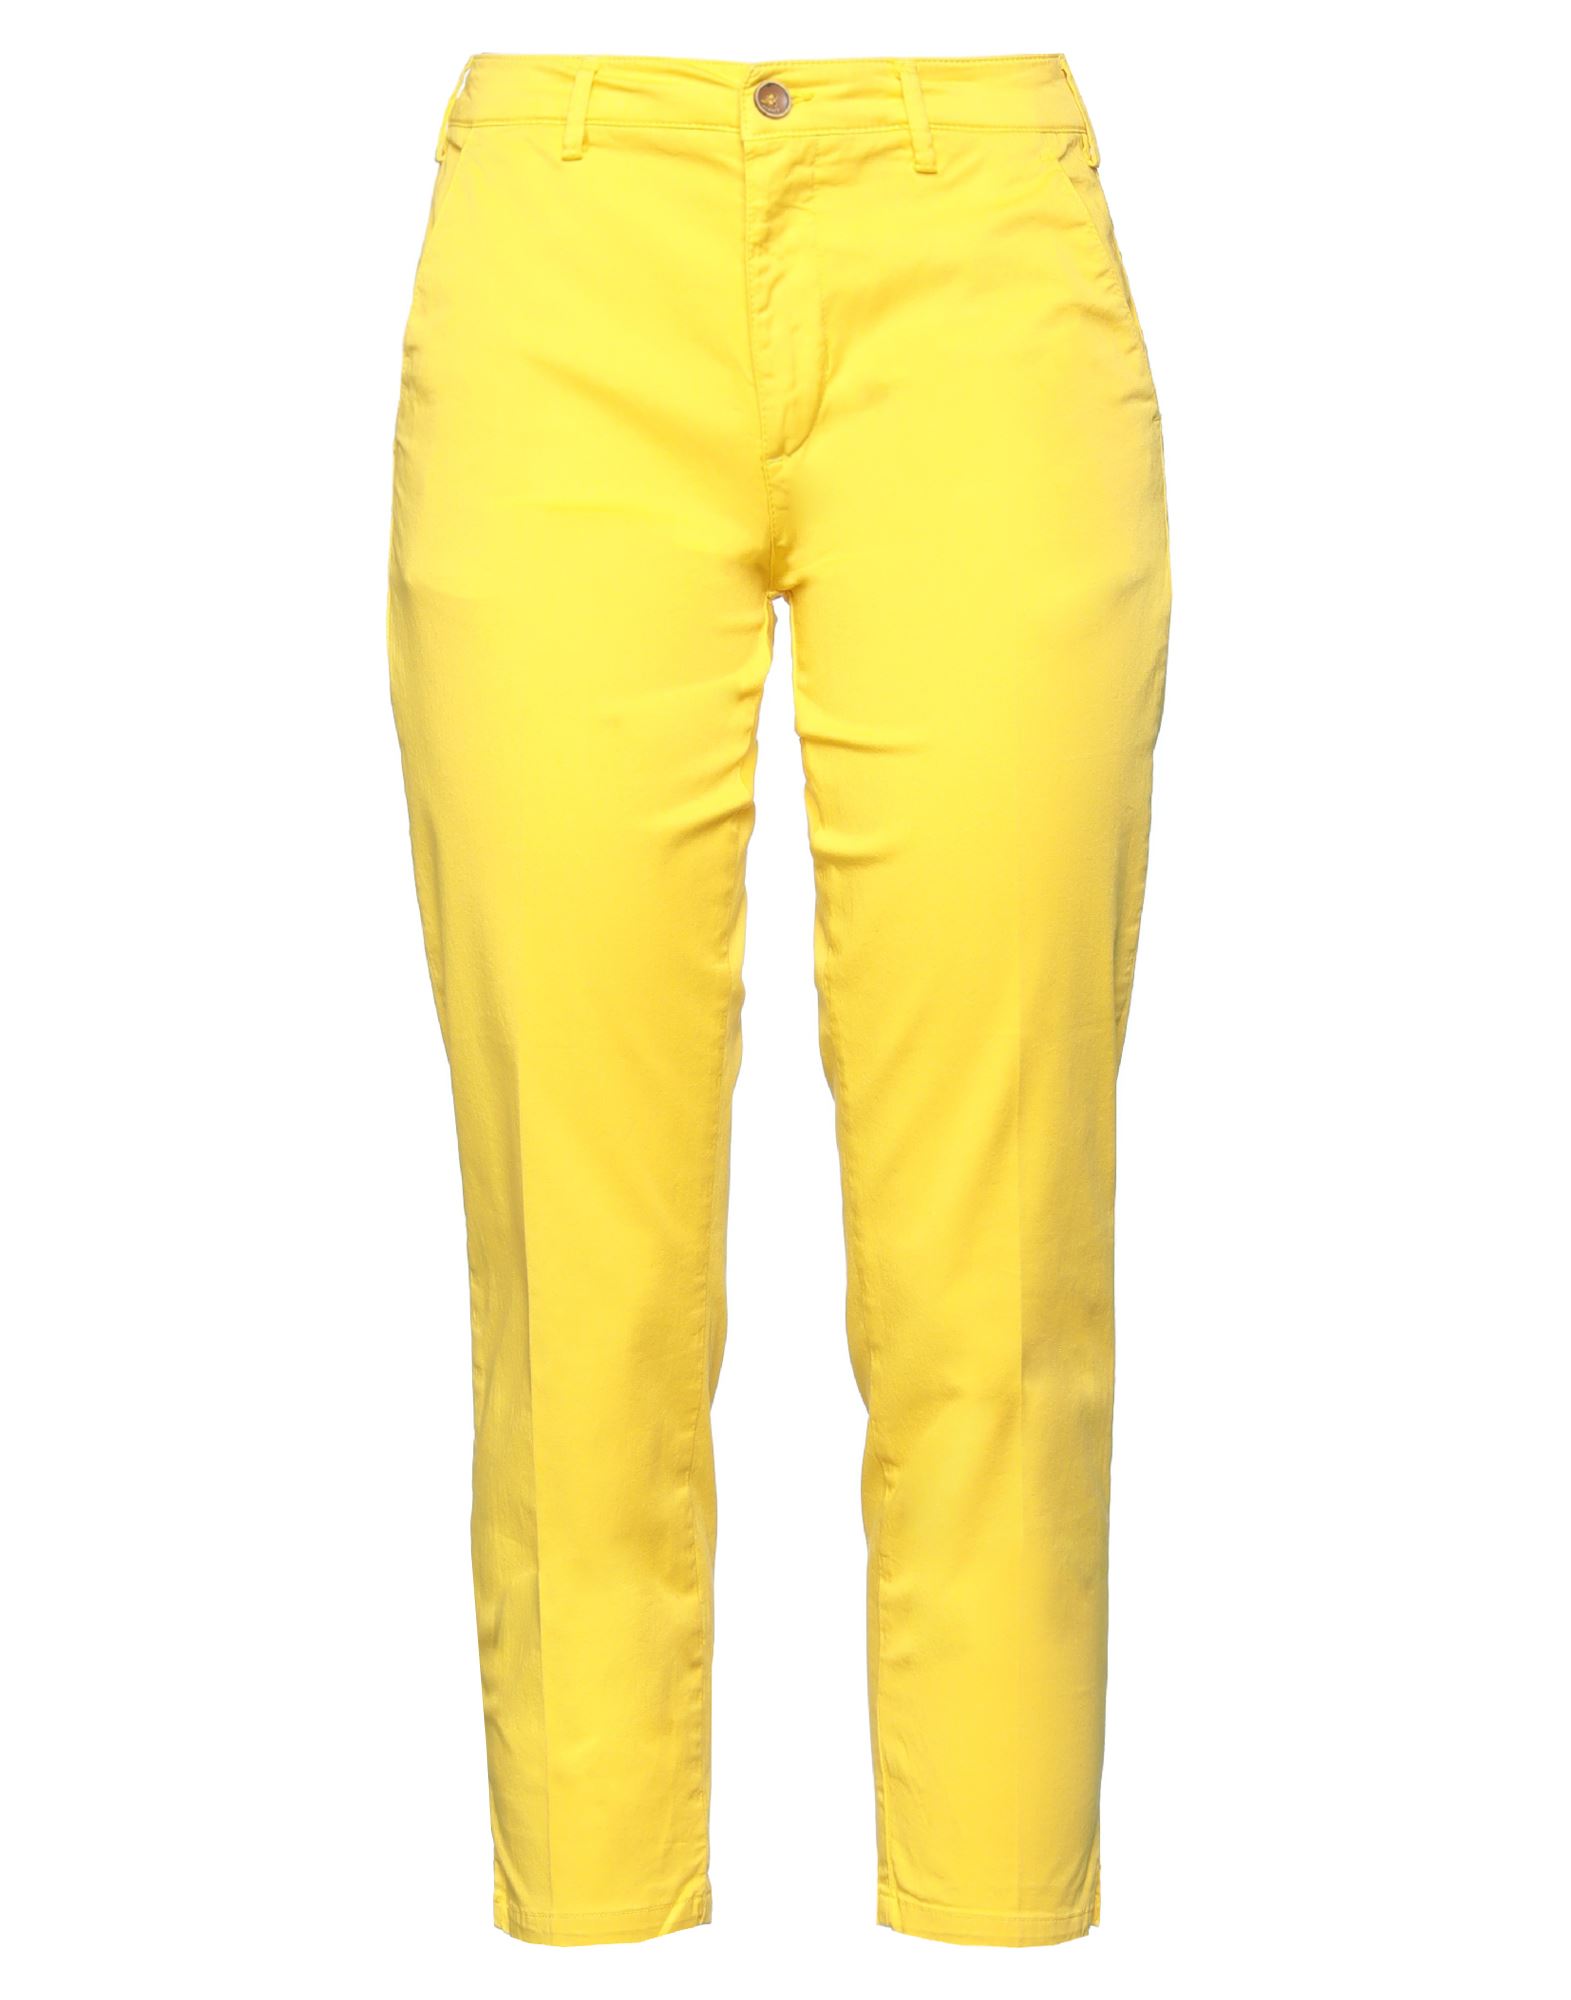 40weft Woman Cropped Pants Yellow Size 8 Cotton, Elastane